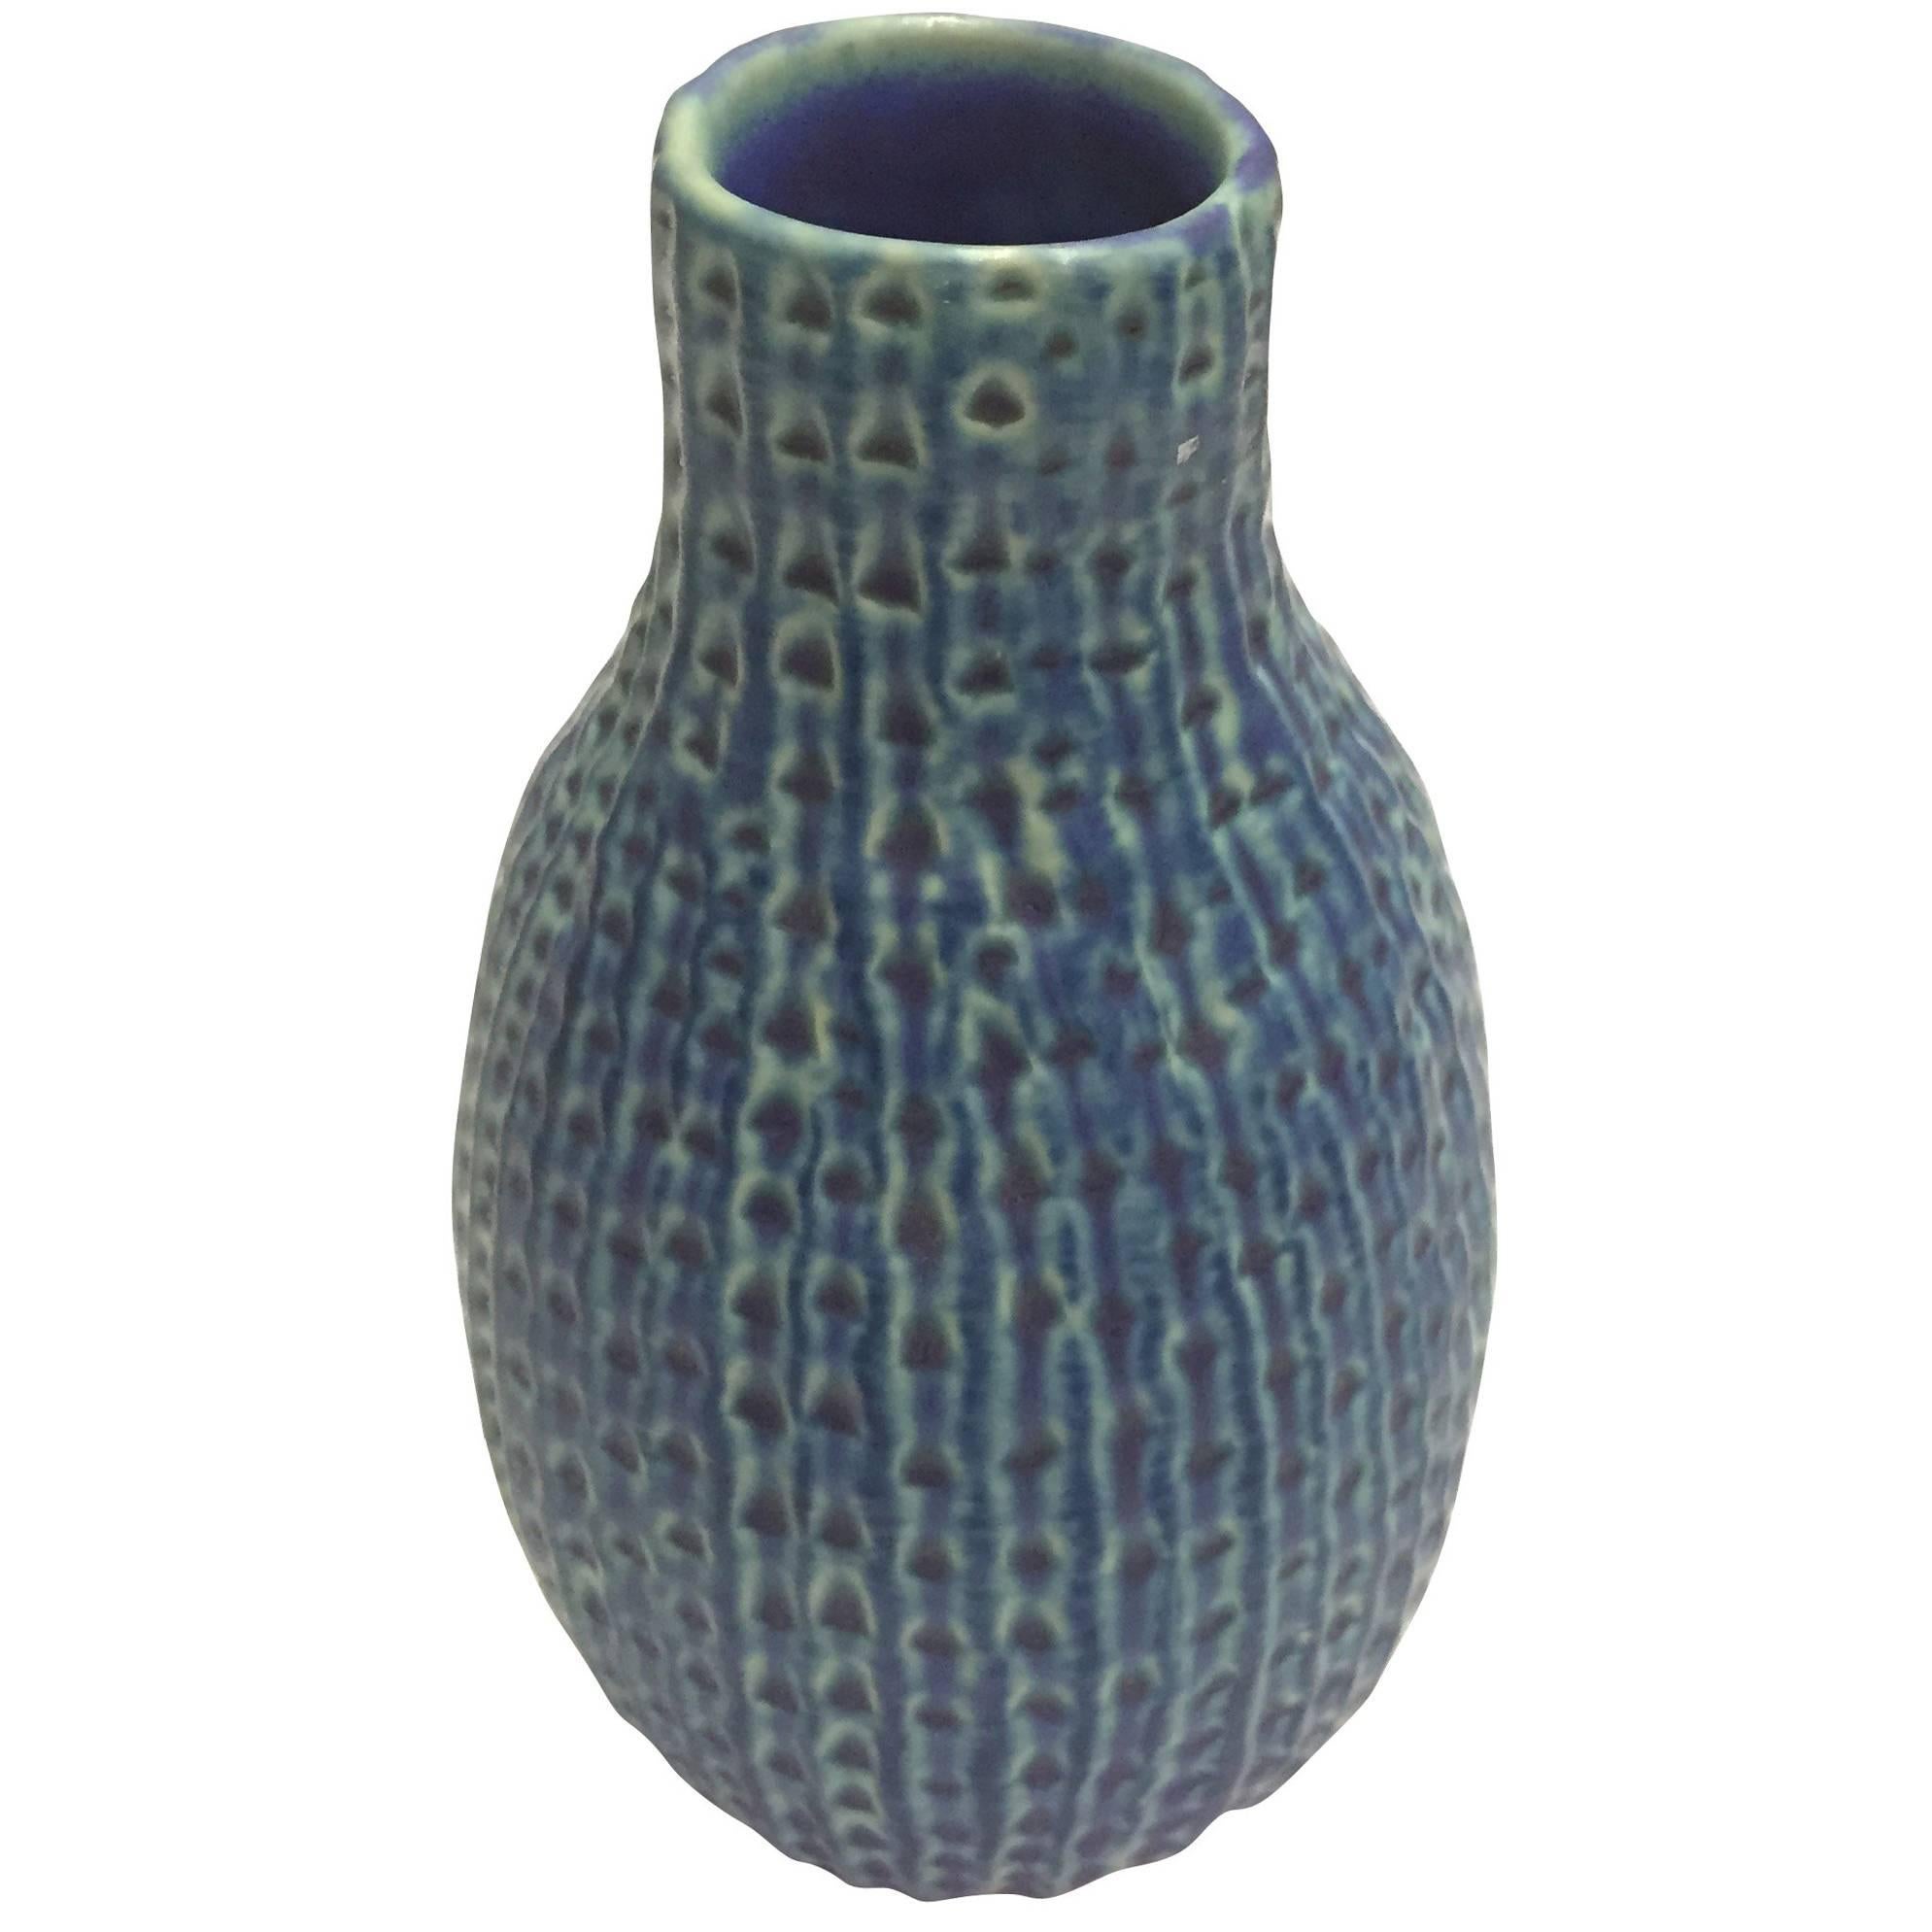 Vintage Inspired Design Turquoise Vase, Thailand, Contemporary